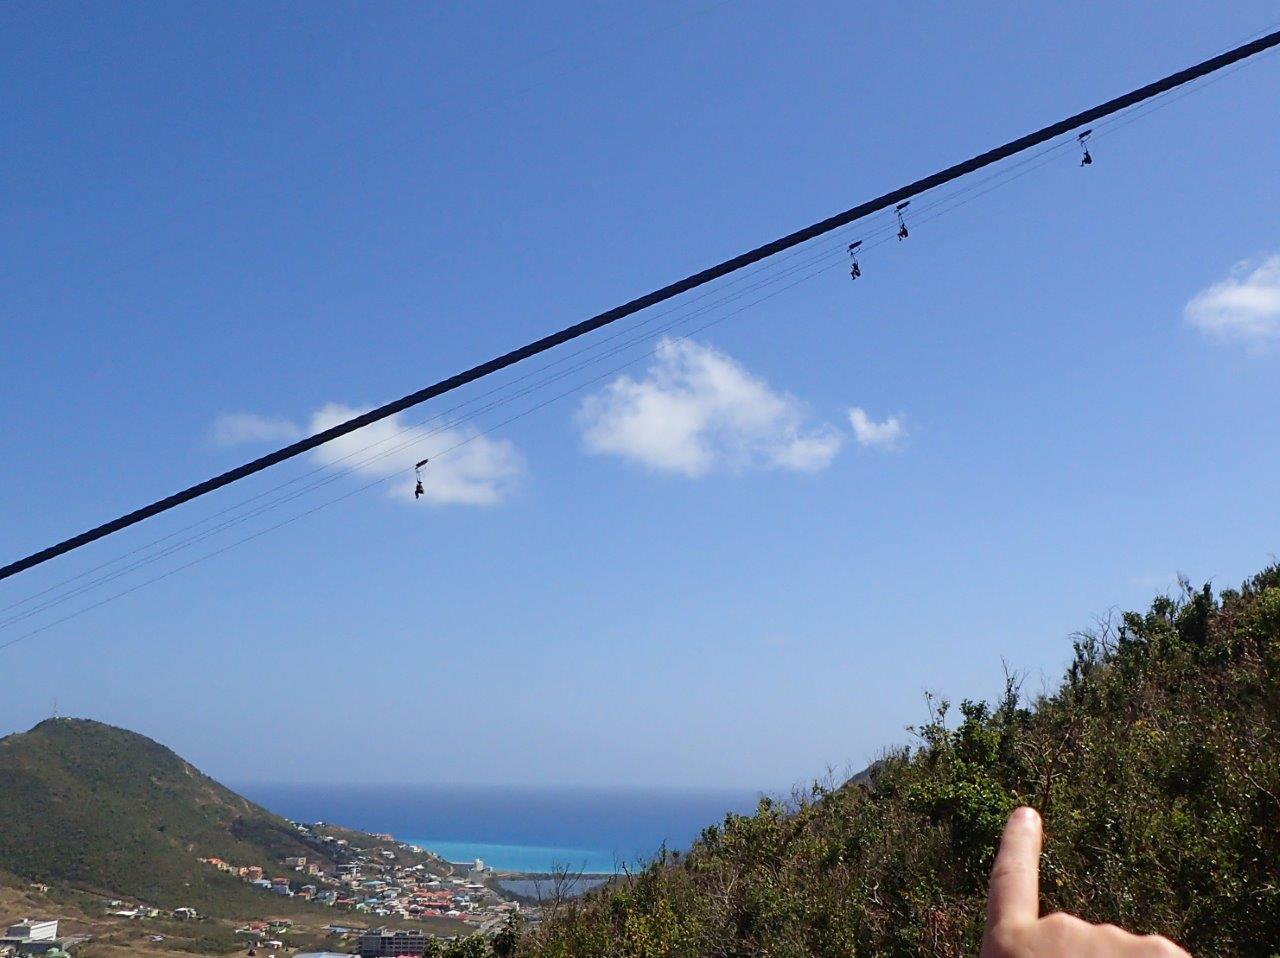 Steepest zip-line in the world!